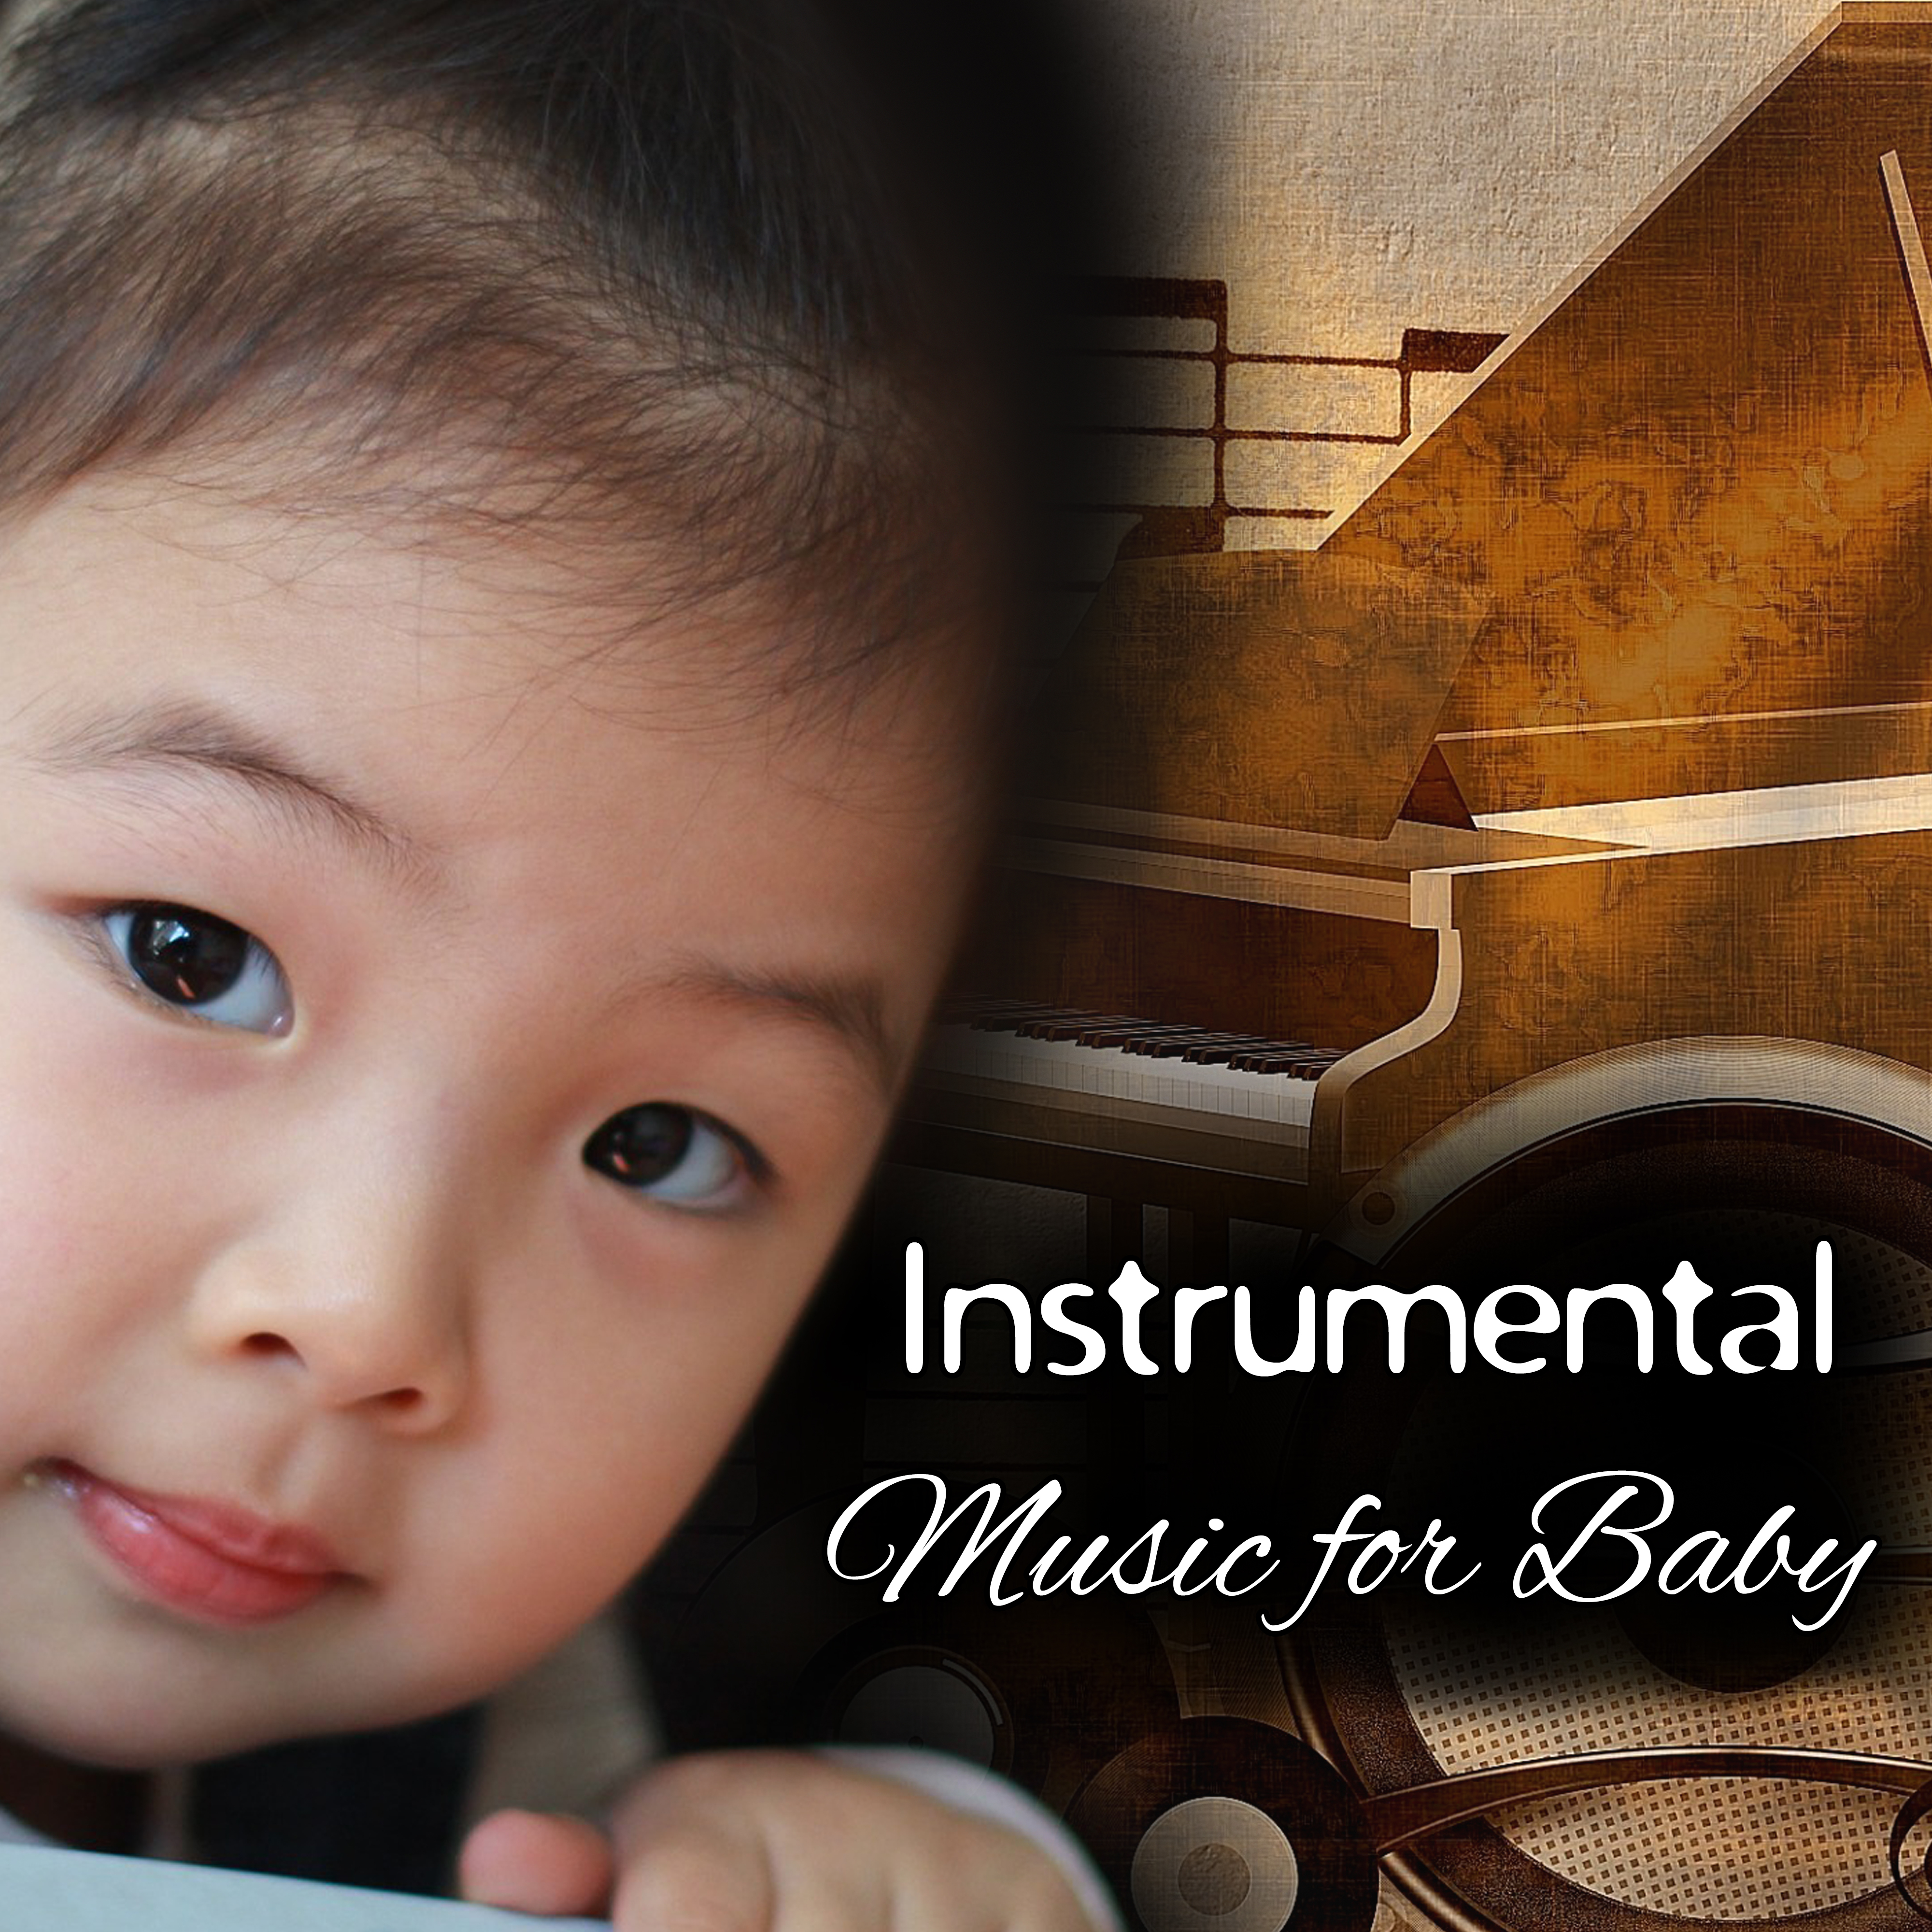 Instrumental Music for Baby  Educational Songs for Kids, Einstein Effect, Peaceful Classical Sounds, Baby Music, Mozart, Bach